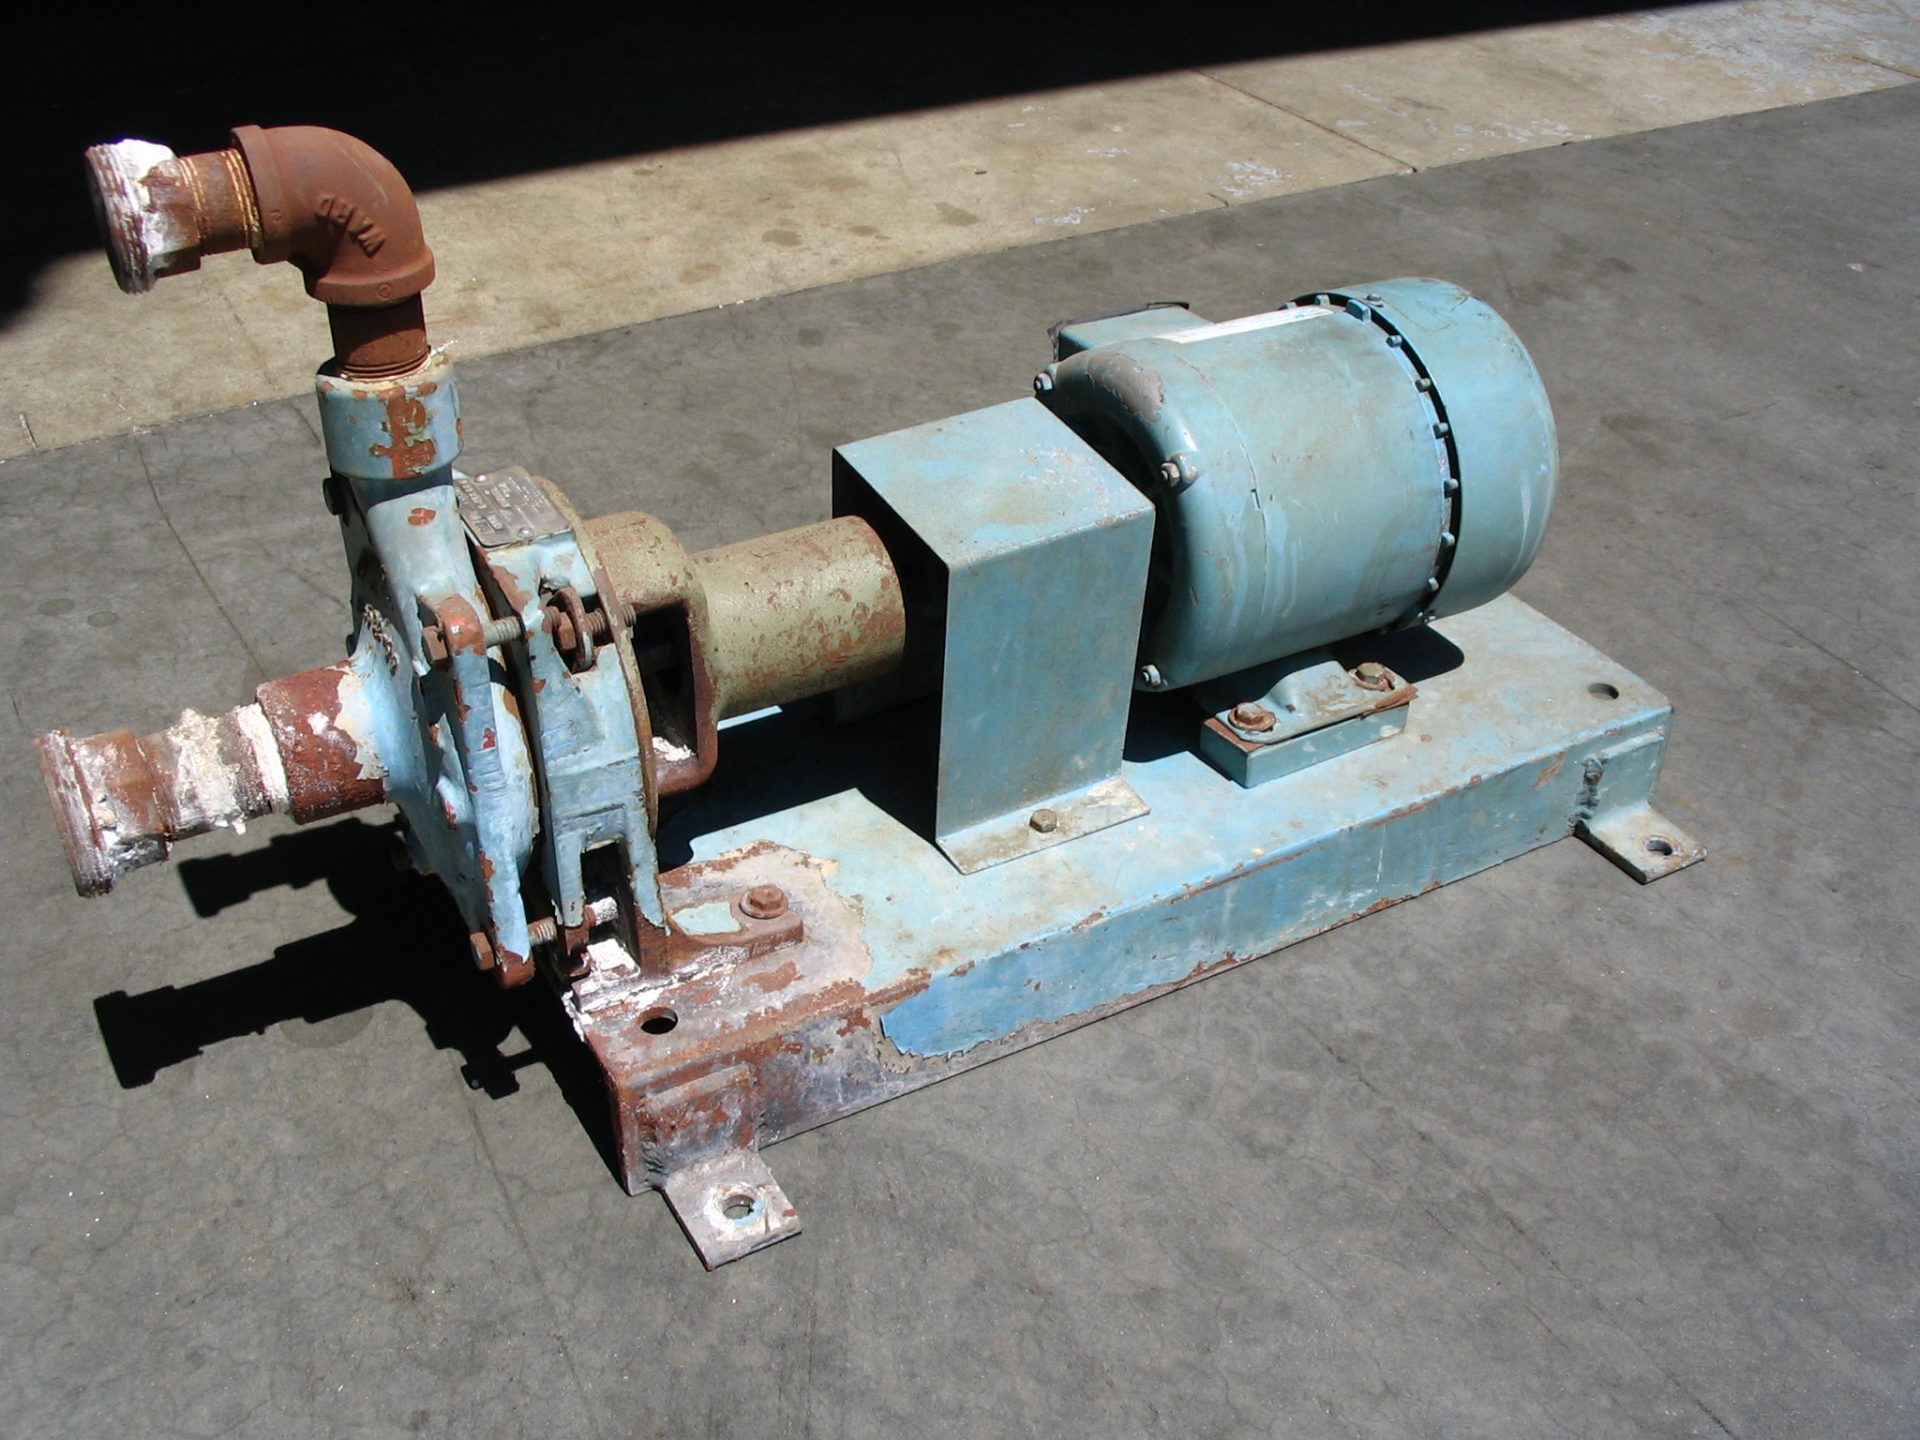 Used Centrifugal Pump - Worthington 1 HP Pump 1.5" Inlet 1.25" Outlet-Pumps - Centrifugal